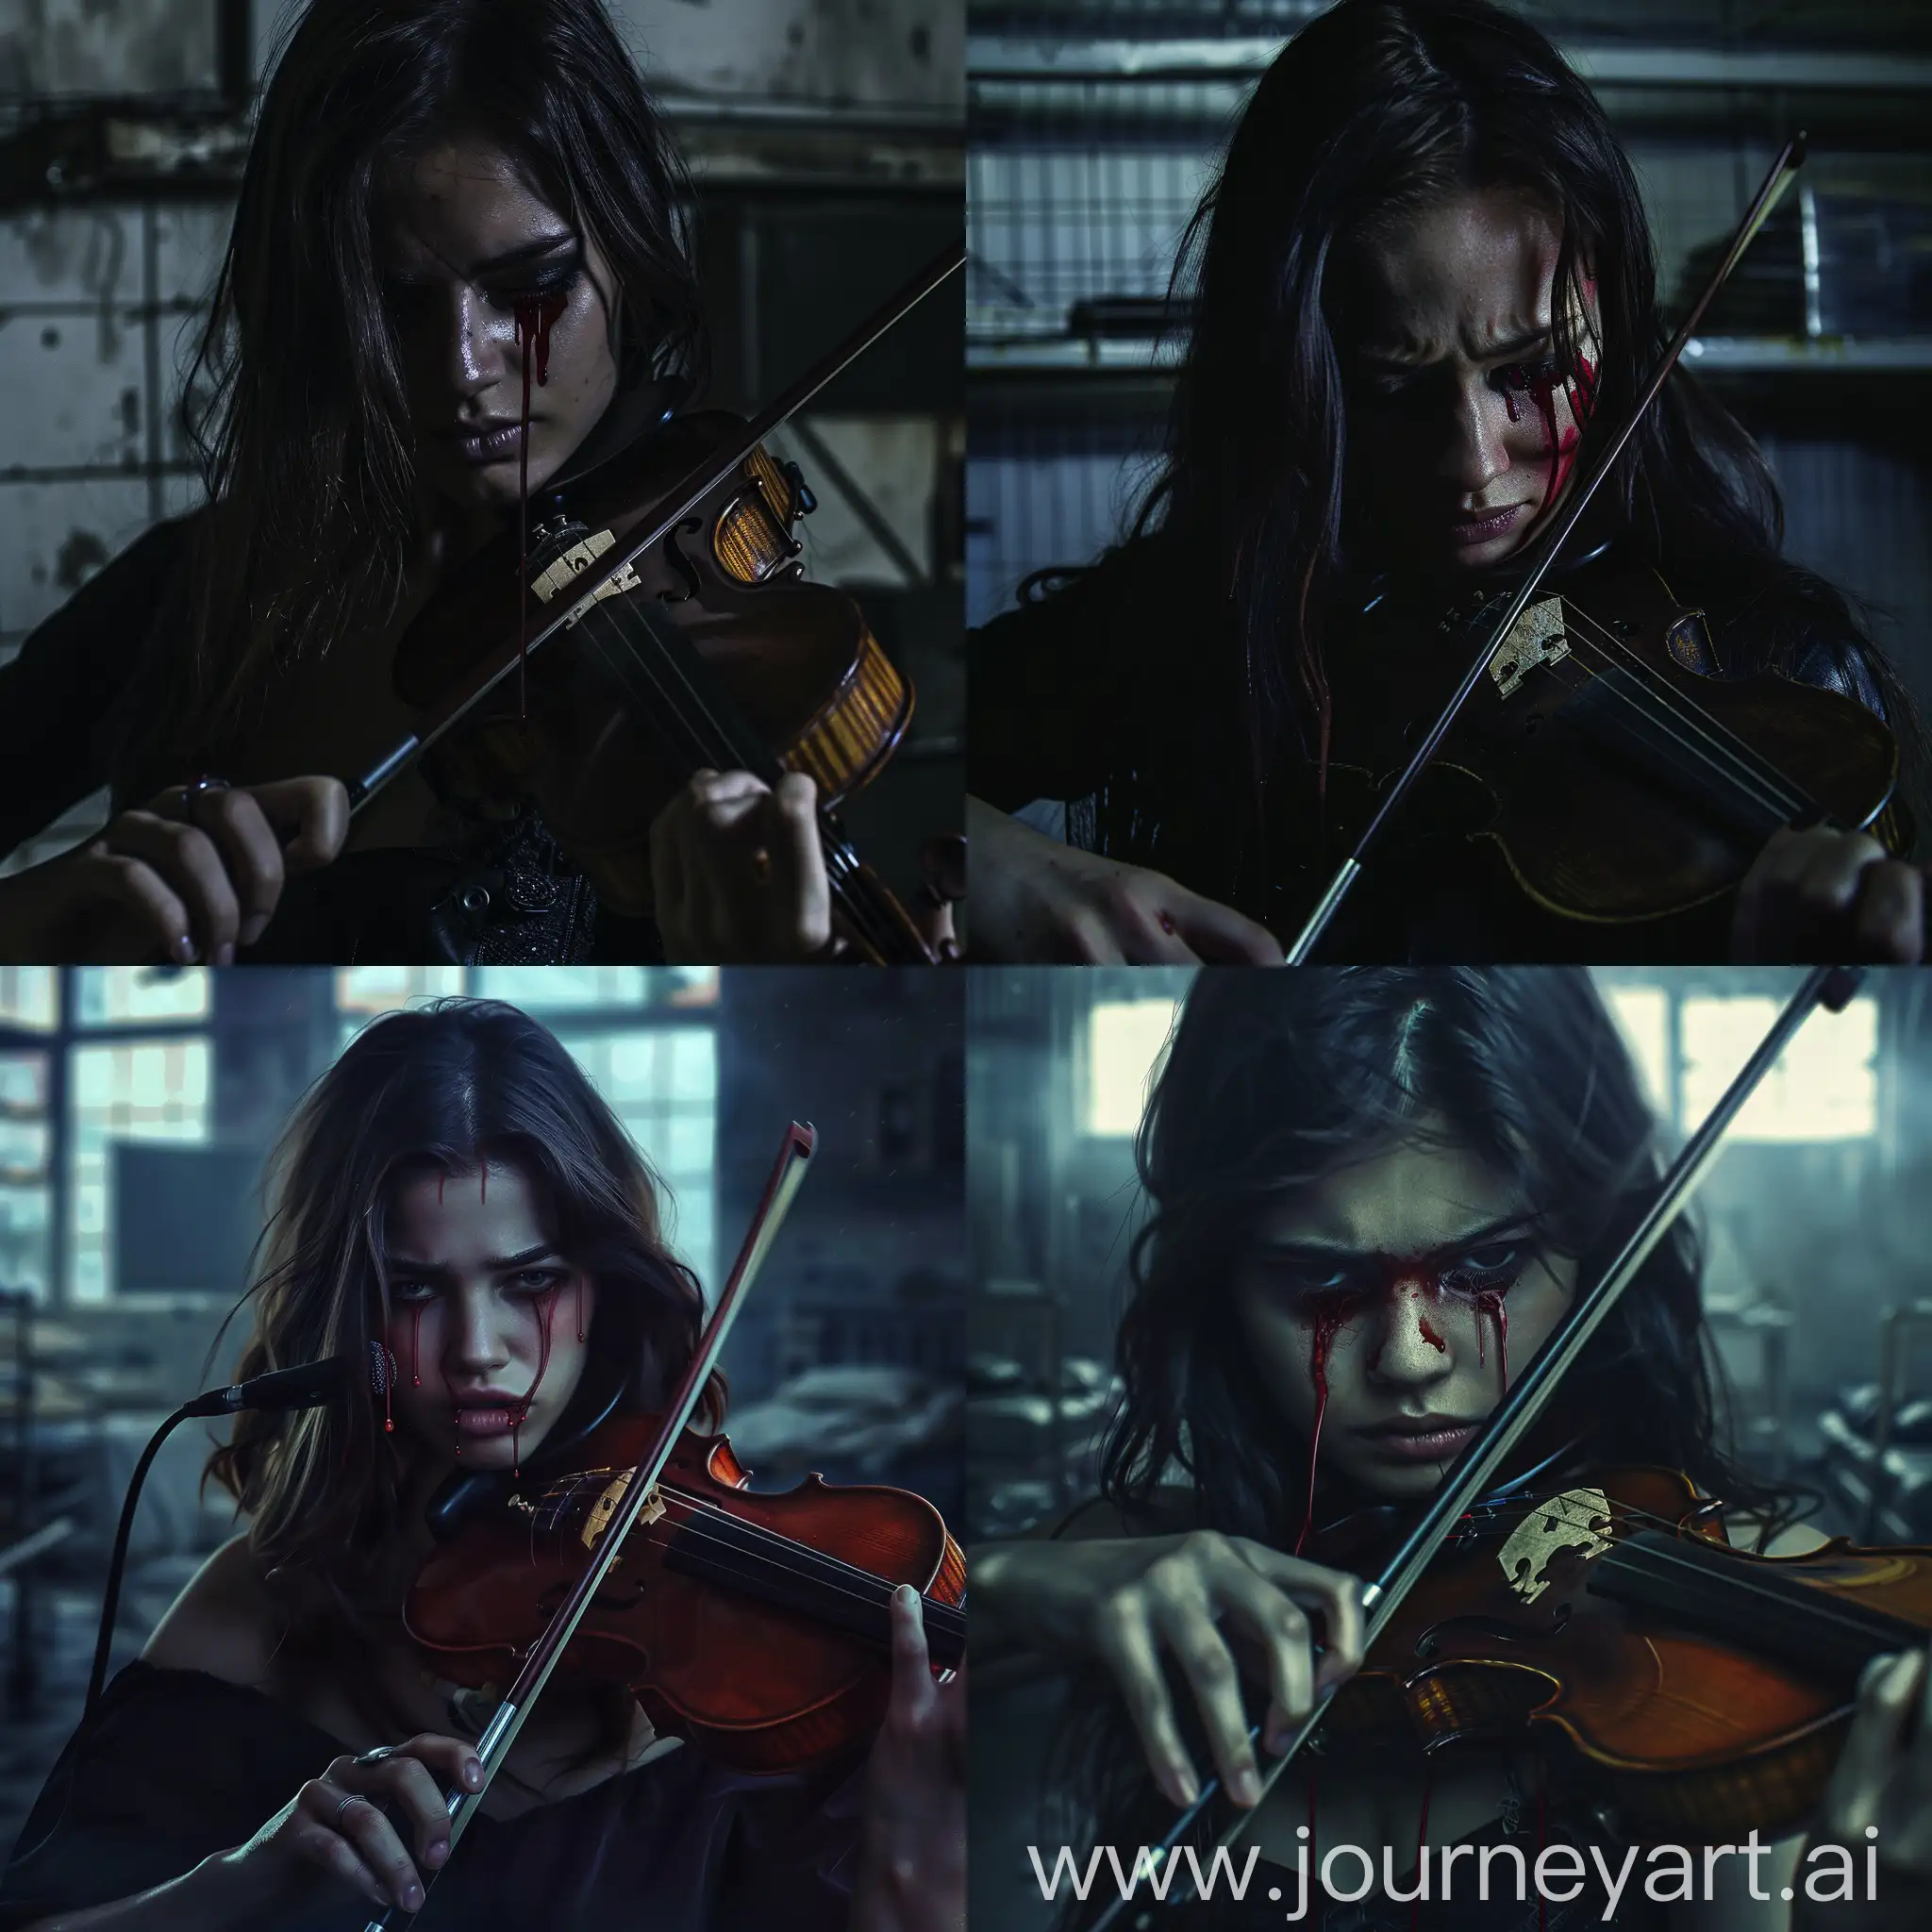 Brunette hair woman with crimson liquid flowing from her eyes, playing violin, she seems sad, at dark morgue, darkness, dark colors, shadows contrast